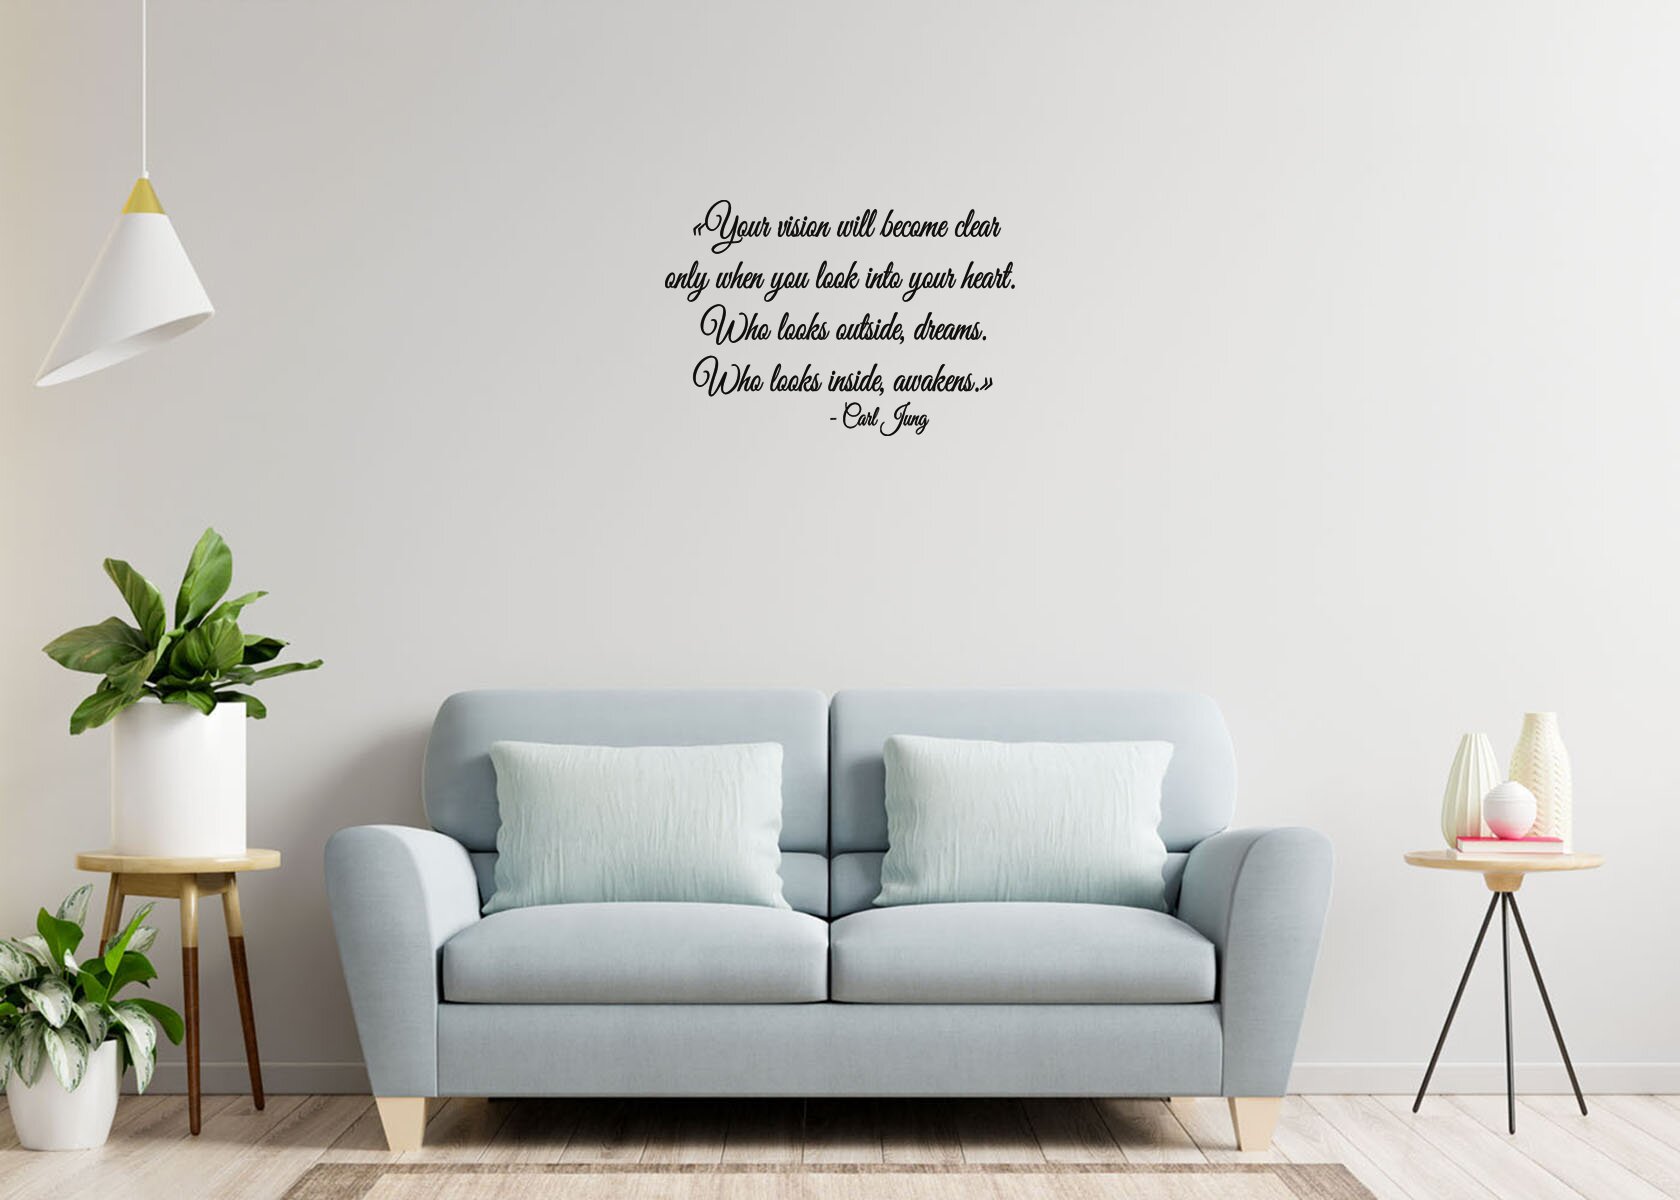 US Quote Wall Decal Stickers Vinyl Bedroom Removable Mural Home Room Art Decor 